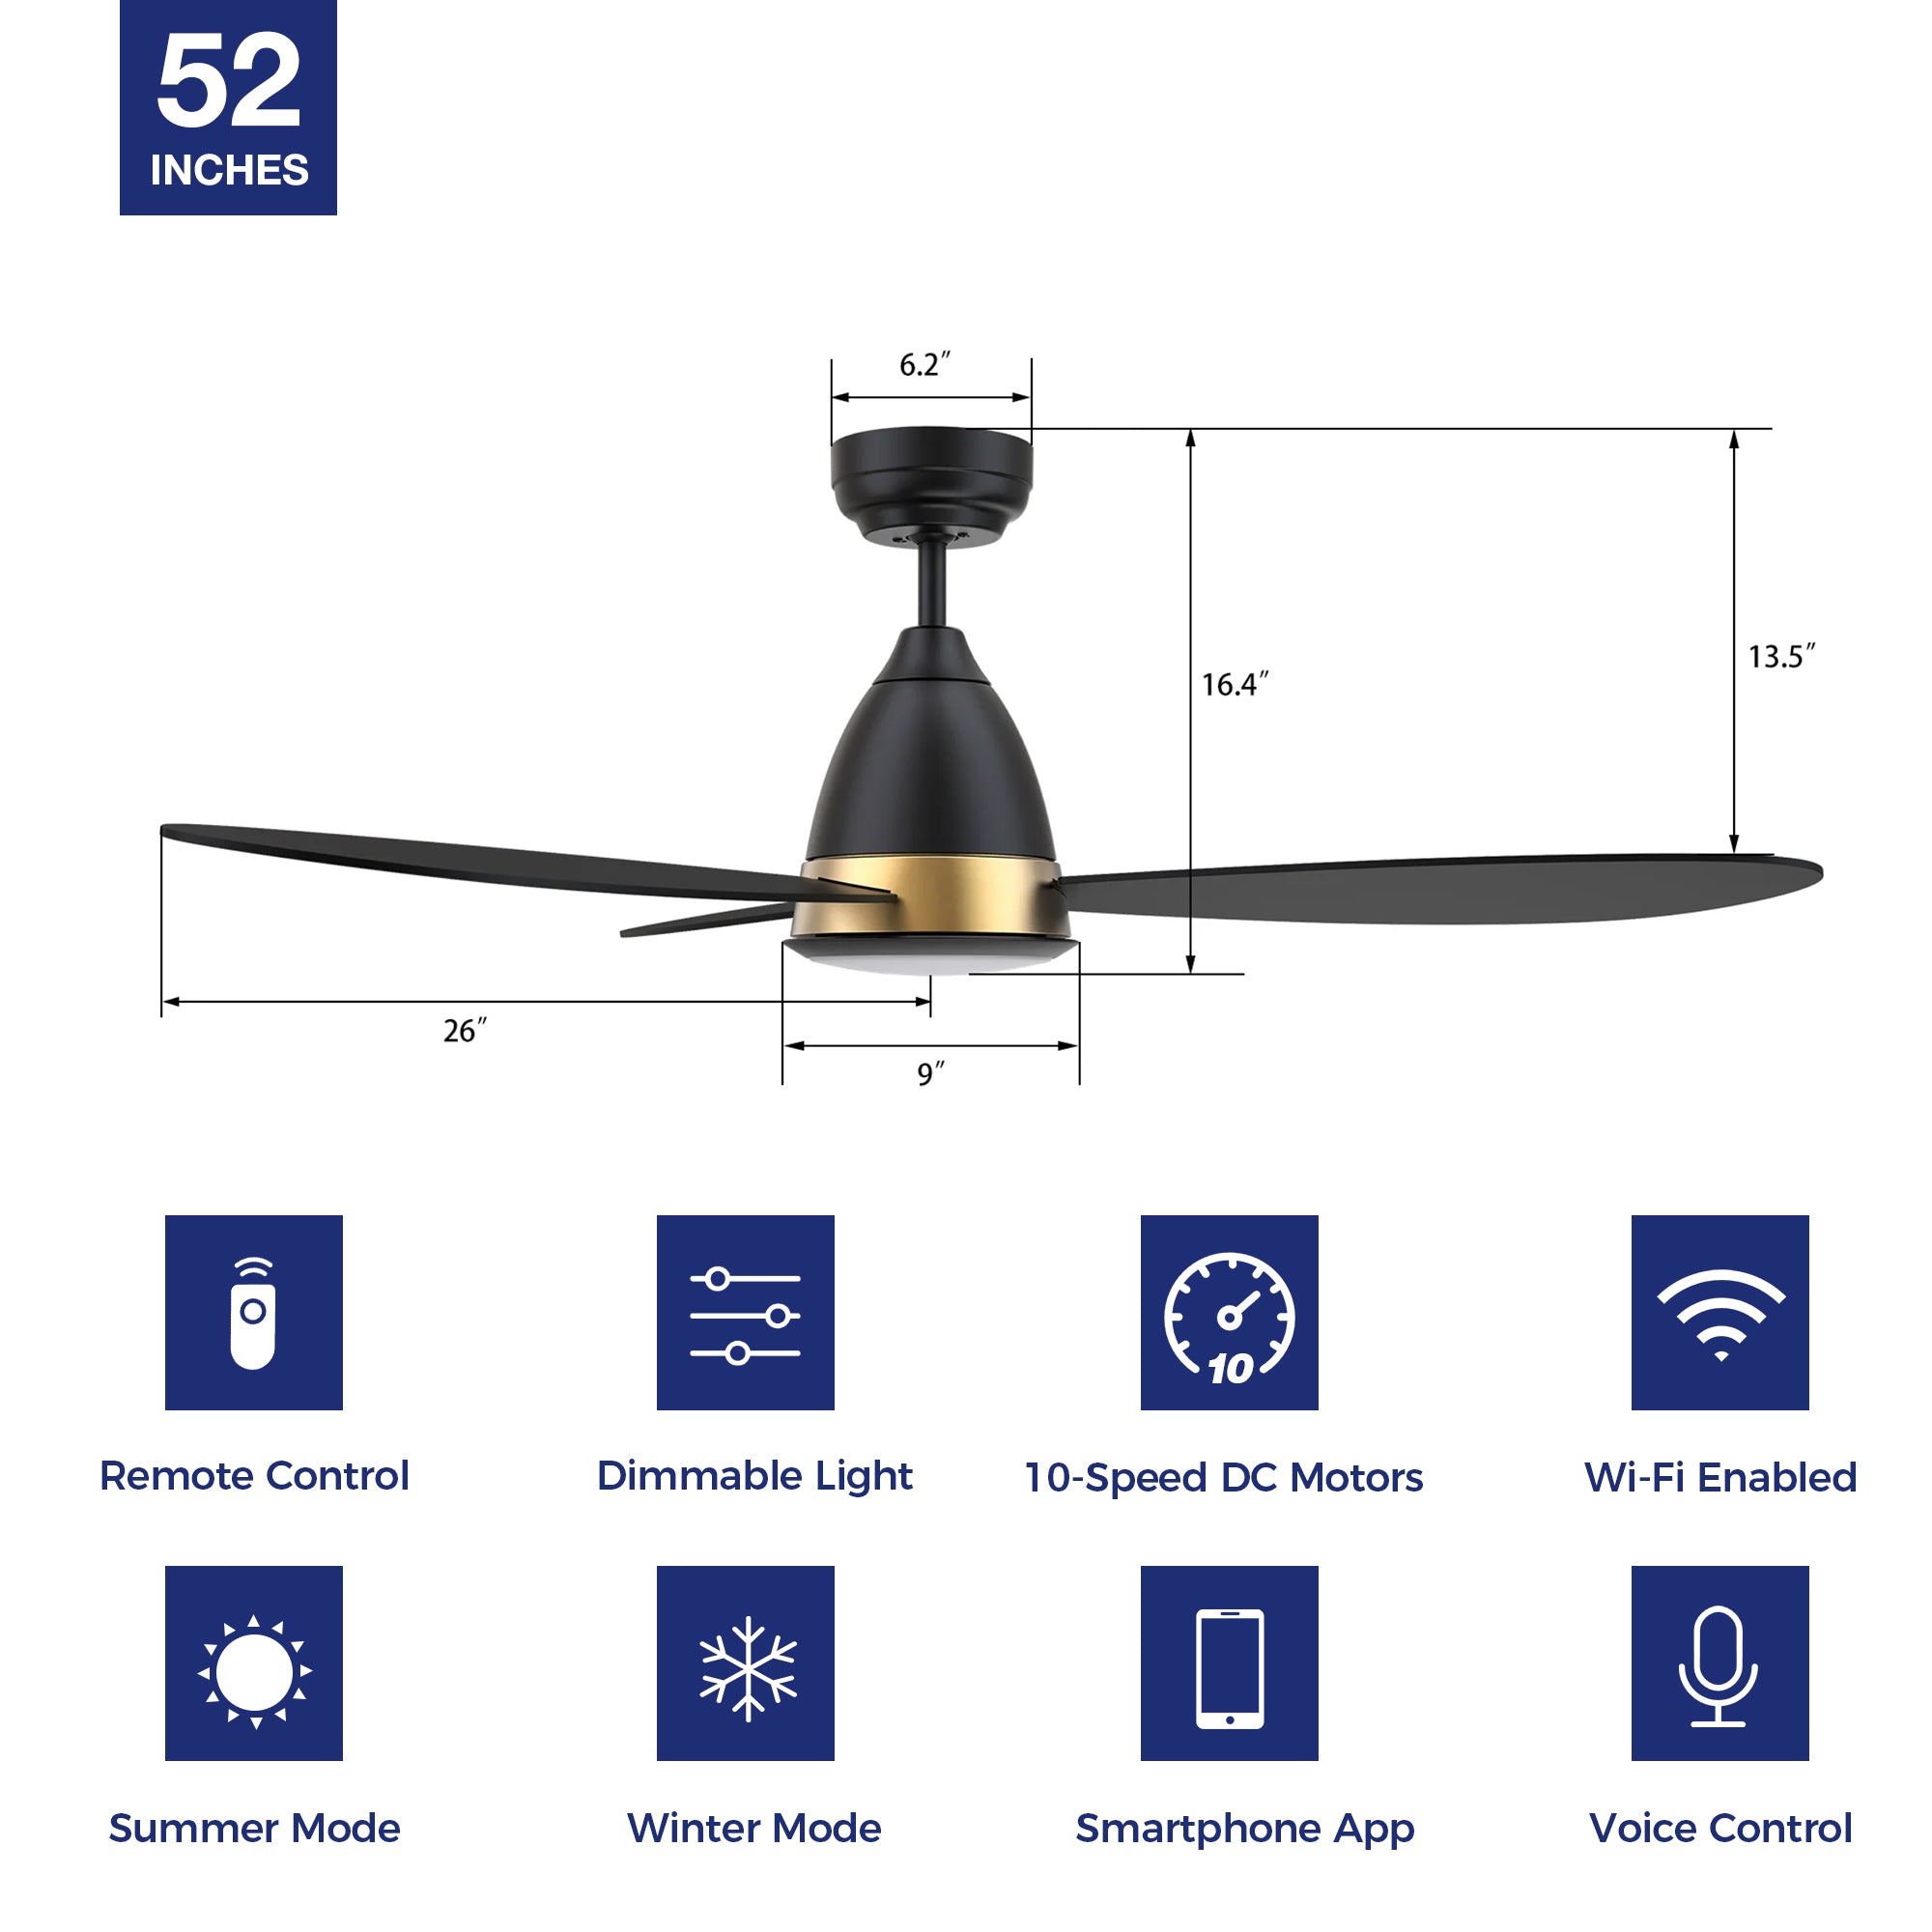 The Smafan Fayette smart ceiling fan is here to redefine the way you cool and light your home. The fan features a modern exterior, available in a pristine white or elegant black finish, graceful blades, and an alluring light cover to modernize any space in your home. The Fayette is also equipped with a powerful motor and versatile LED lighting so you can perfect your environment at the touch of a button.